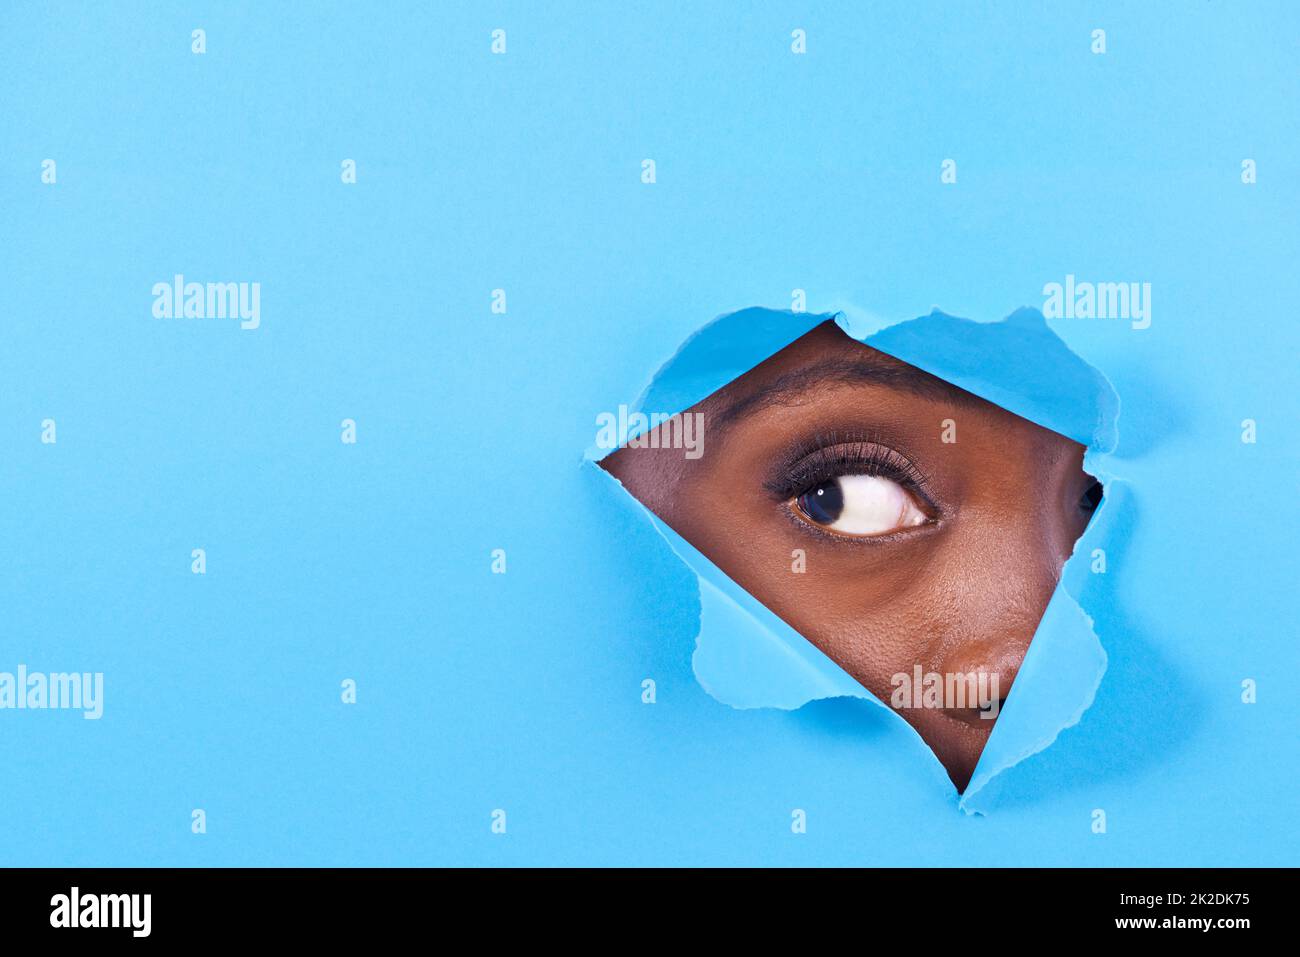 Is there something there. A view of a womans eye looking through a hole in some colorful paper. Stock Photo